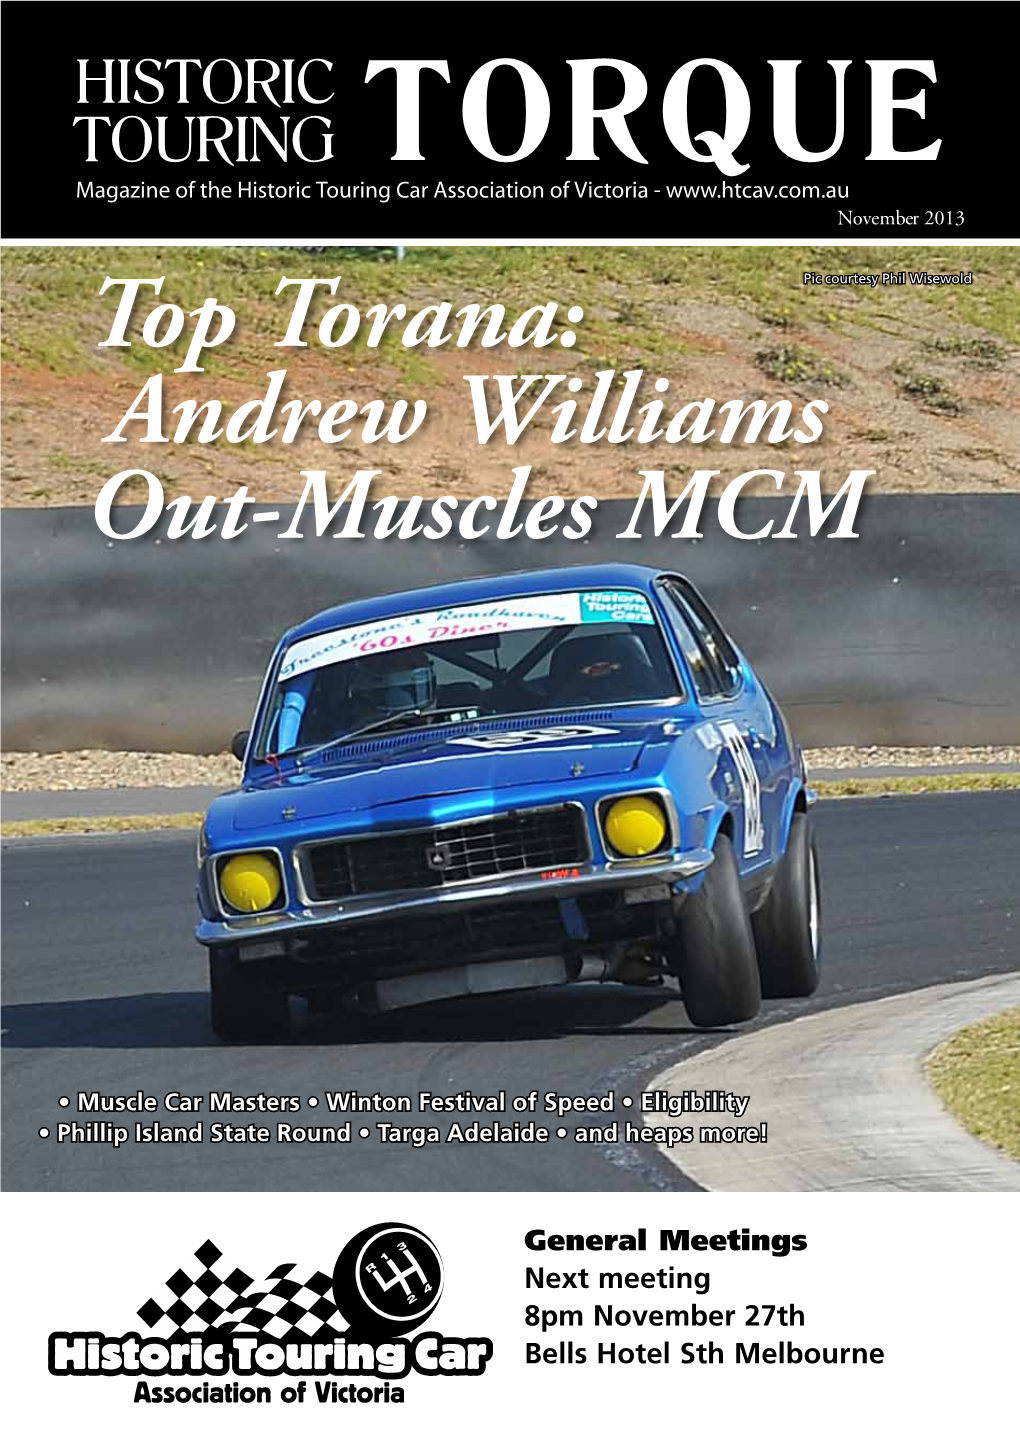 Top Torana: Andrew Williams Out-Muscles